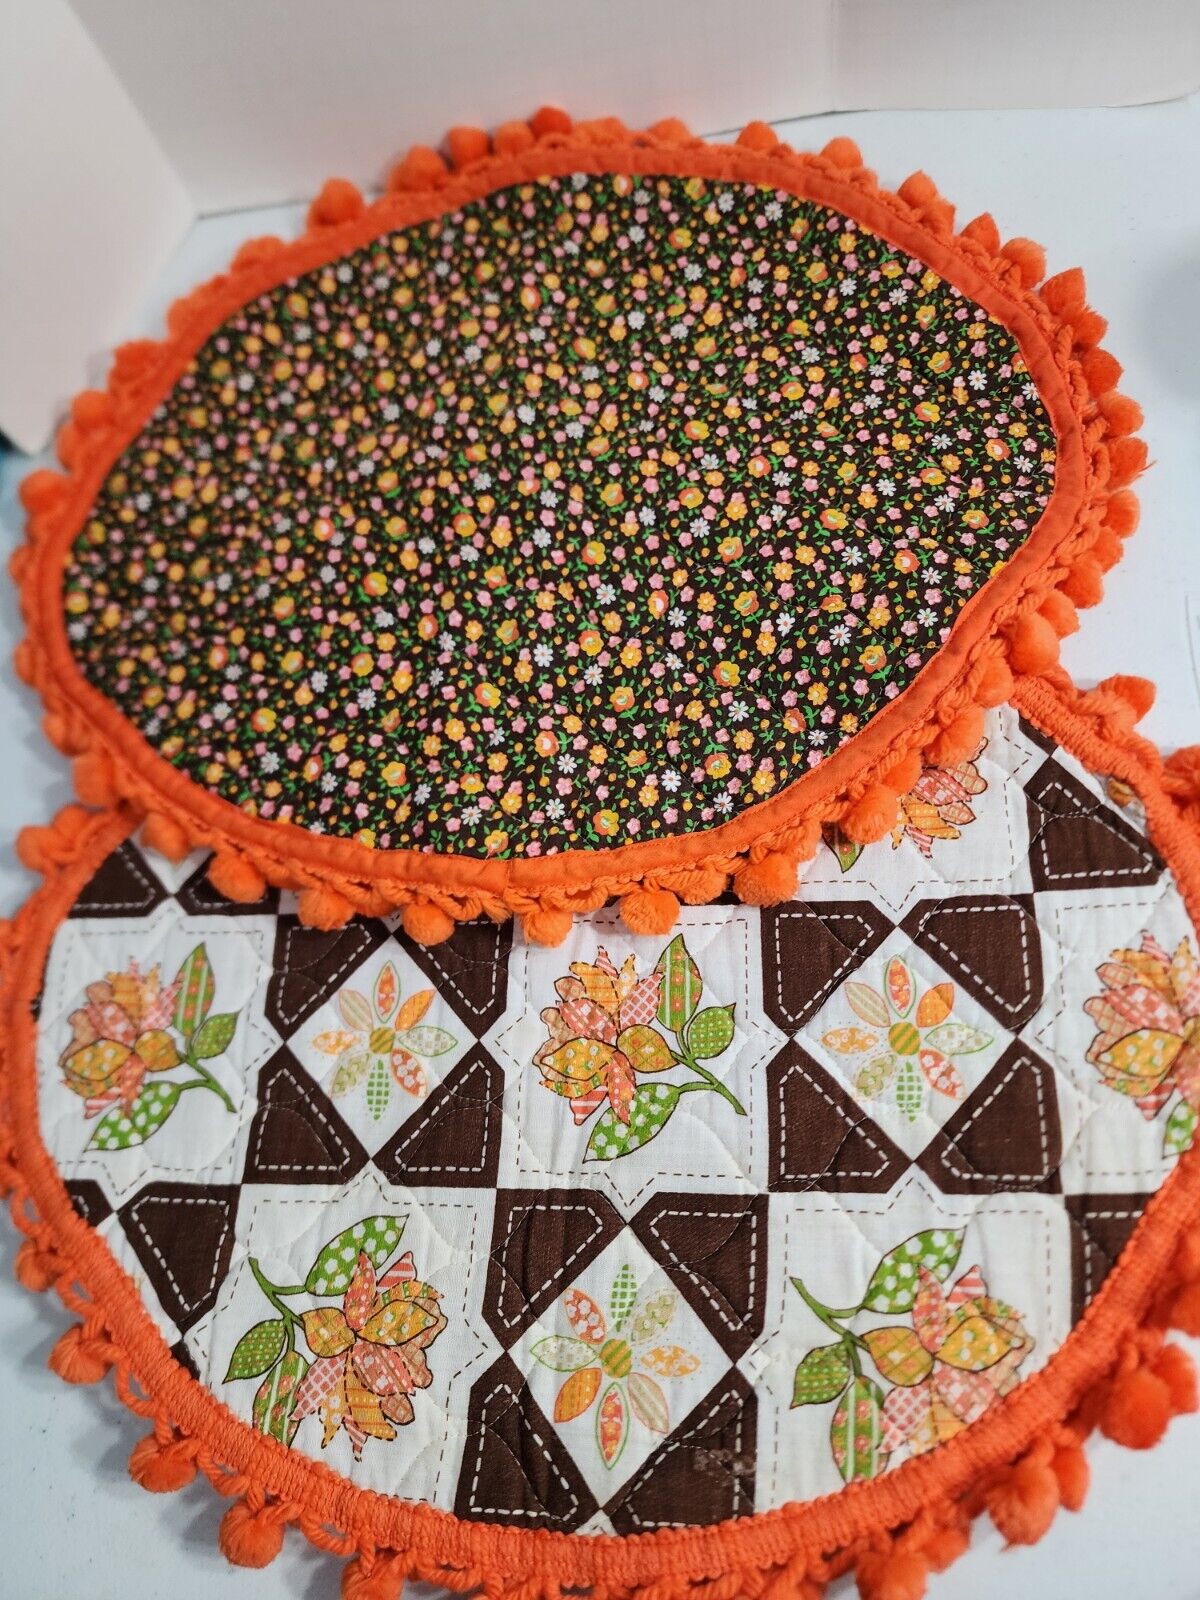 4 Vintage Quilted Hand Made Reversible Floral Oval Placemats Orange Ball Trim